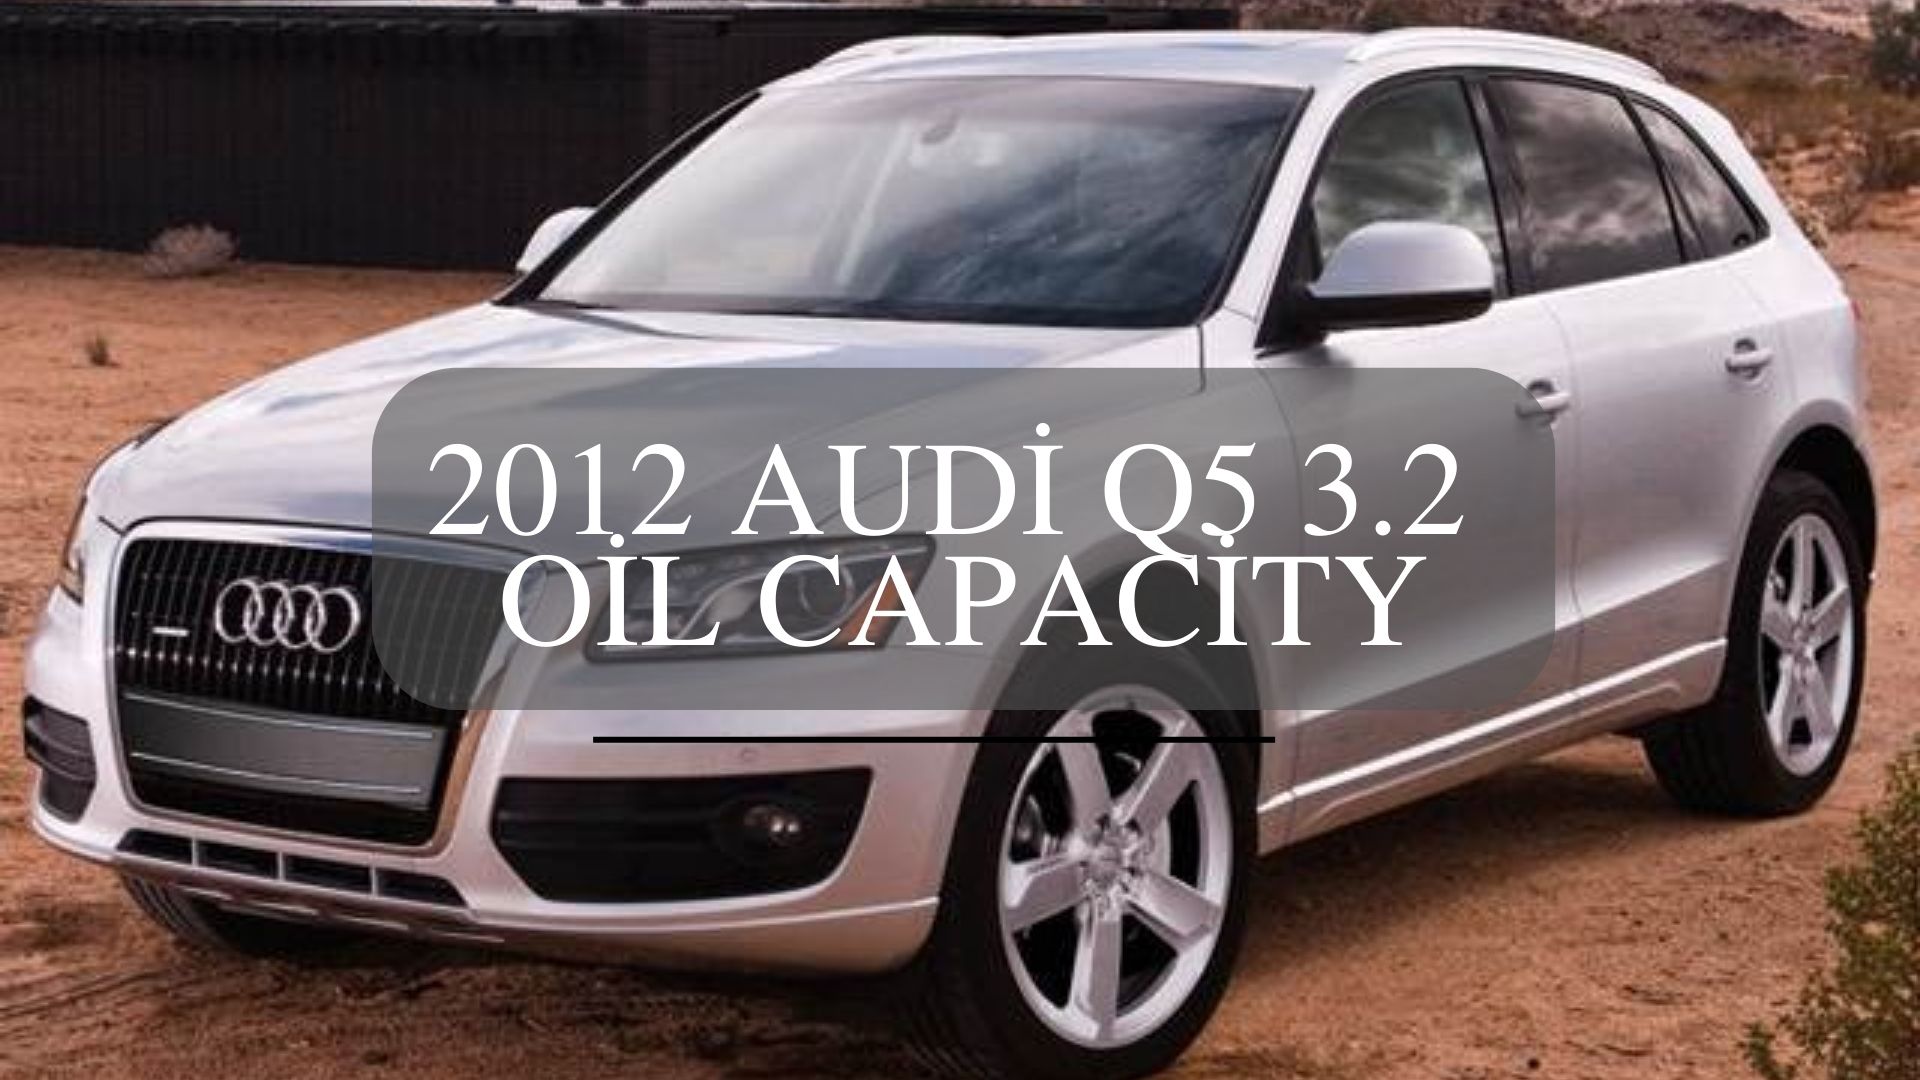 If you have a 2012 Audi Q5 3.2, you may be wondering how much oil your car requires. It's not an exact science, but there are a few factors to keep in mind. For example, your car might require a synthetic or 0W-40 type of oil, which is different from regular oil. And you might also need to change the oil regularly because of its high mileage.